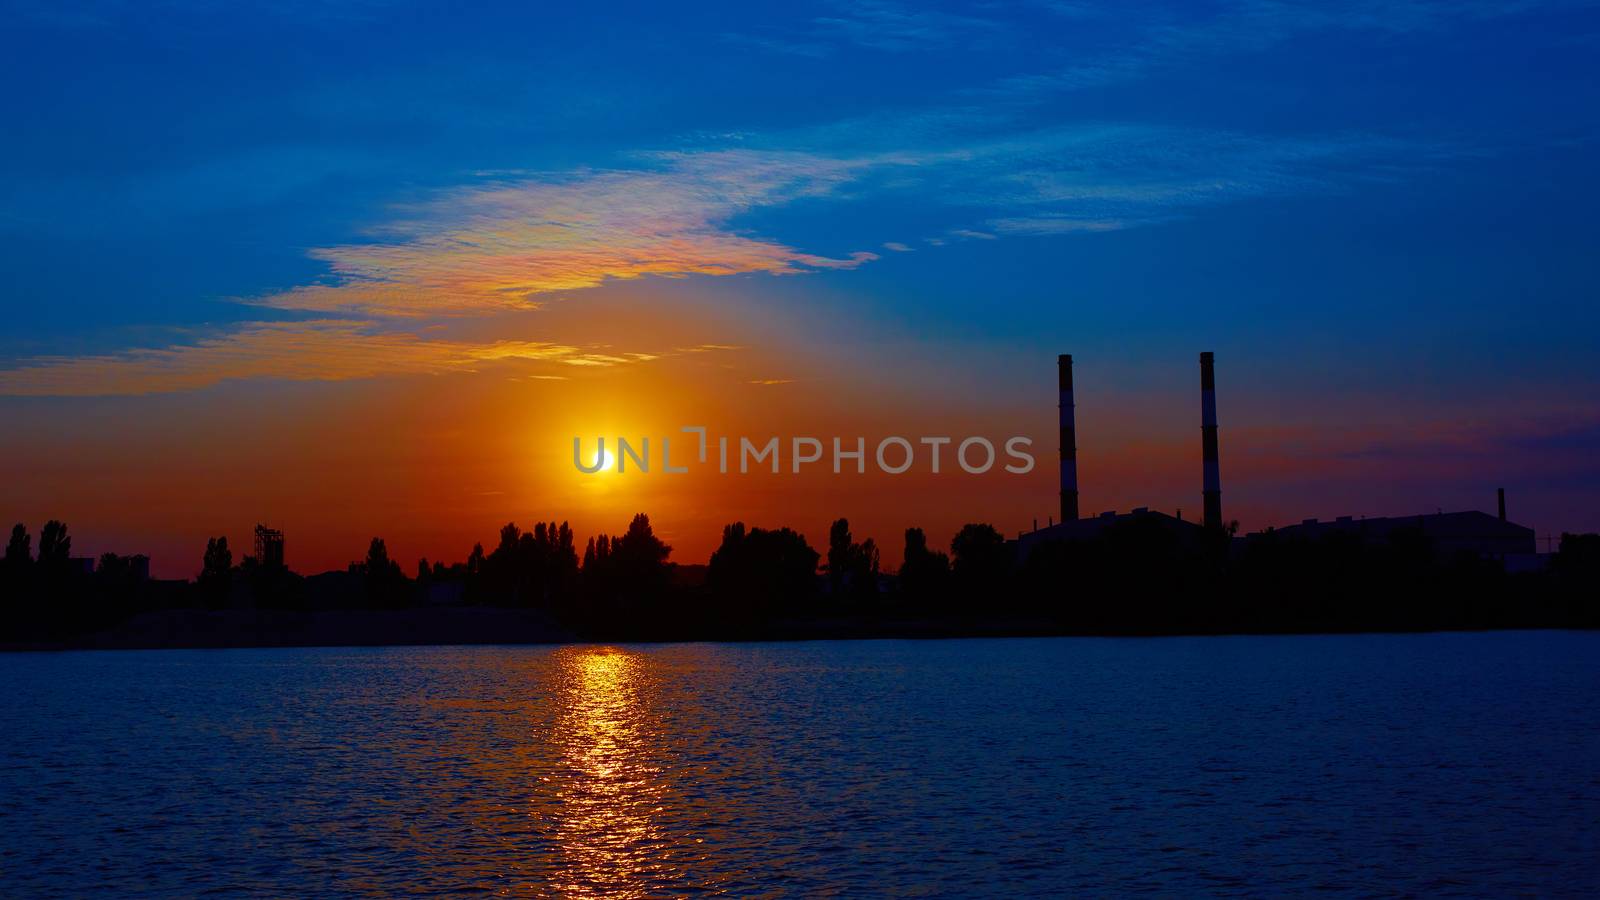 Oil refinery factory in silhouette and sunrise sky